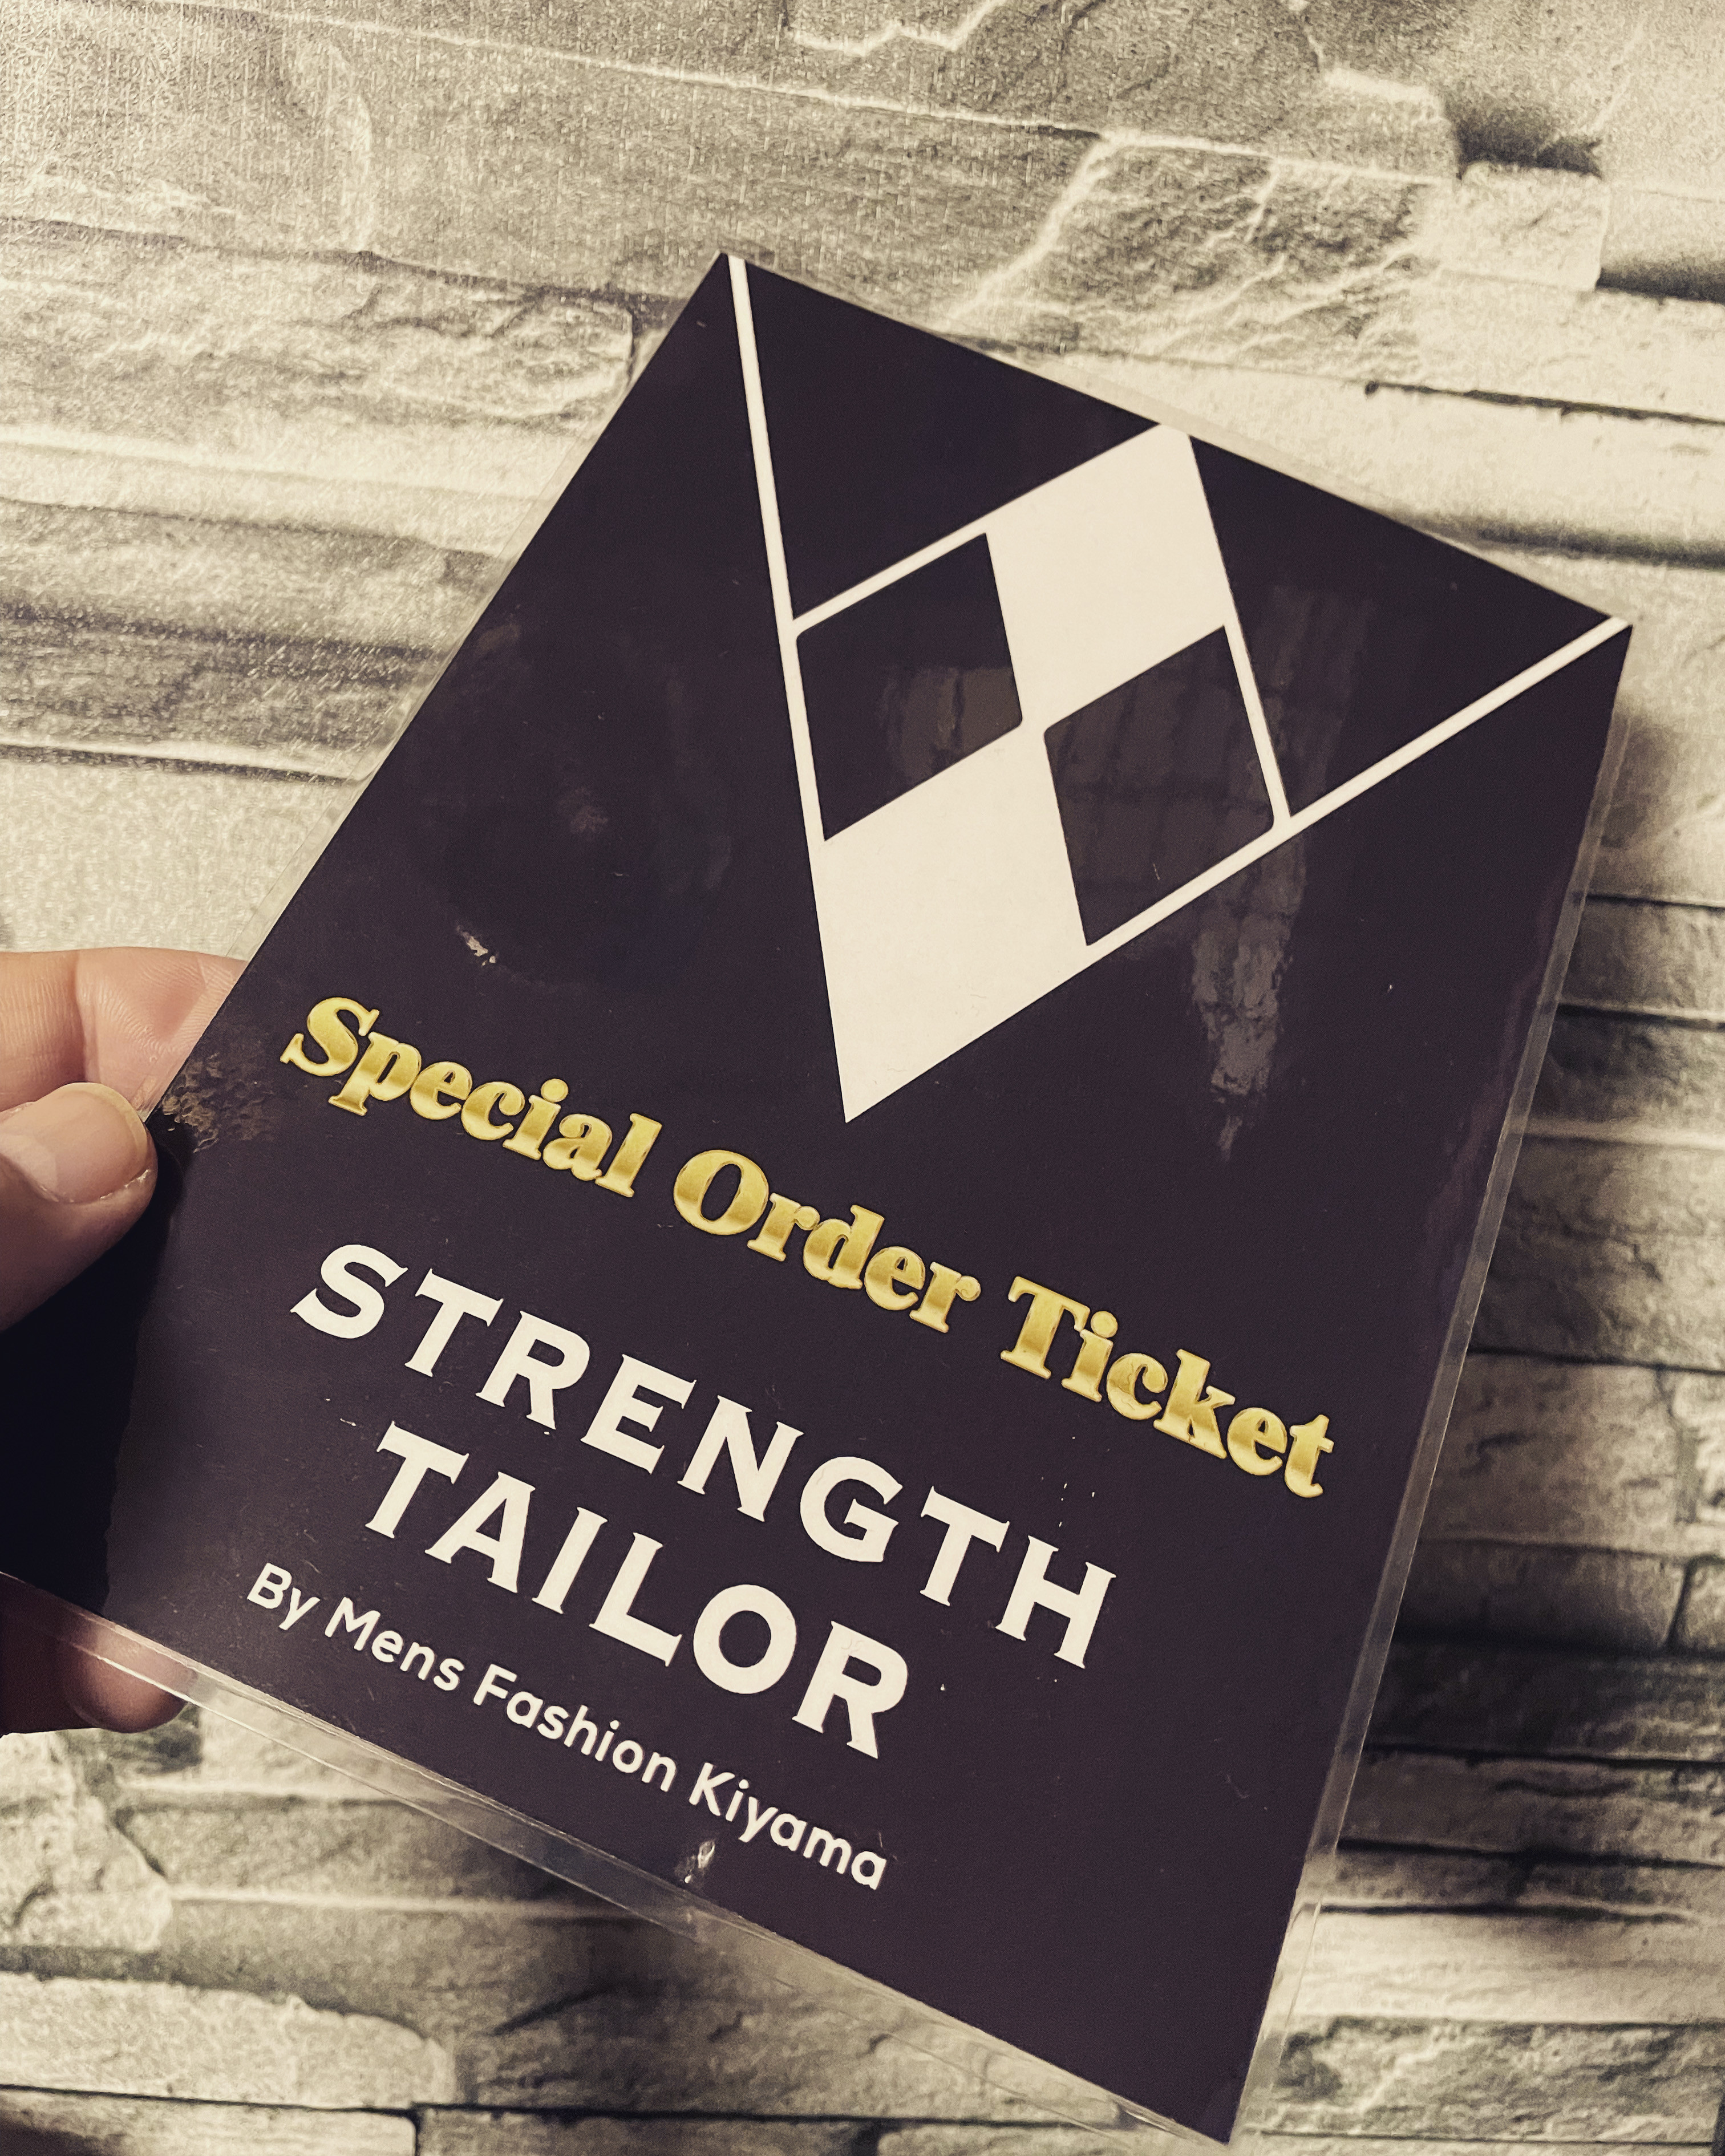 STRENGTH TAILOR special order ticket スペシャルオーダーチケット！